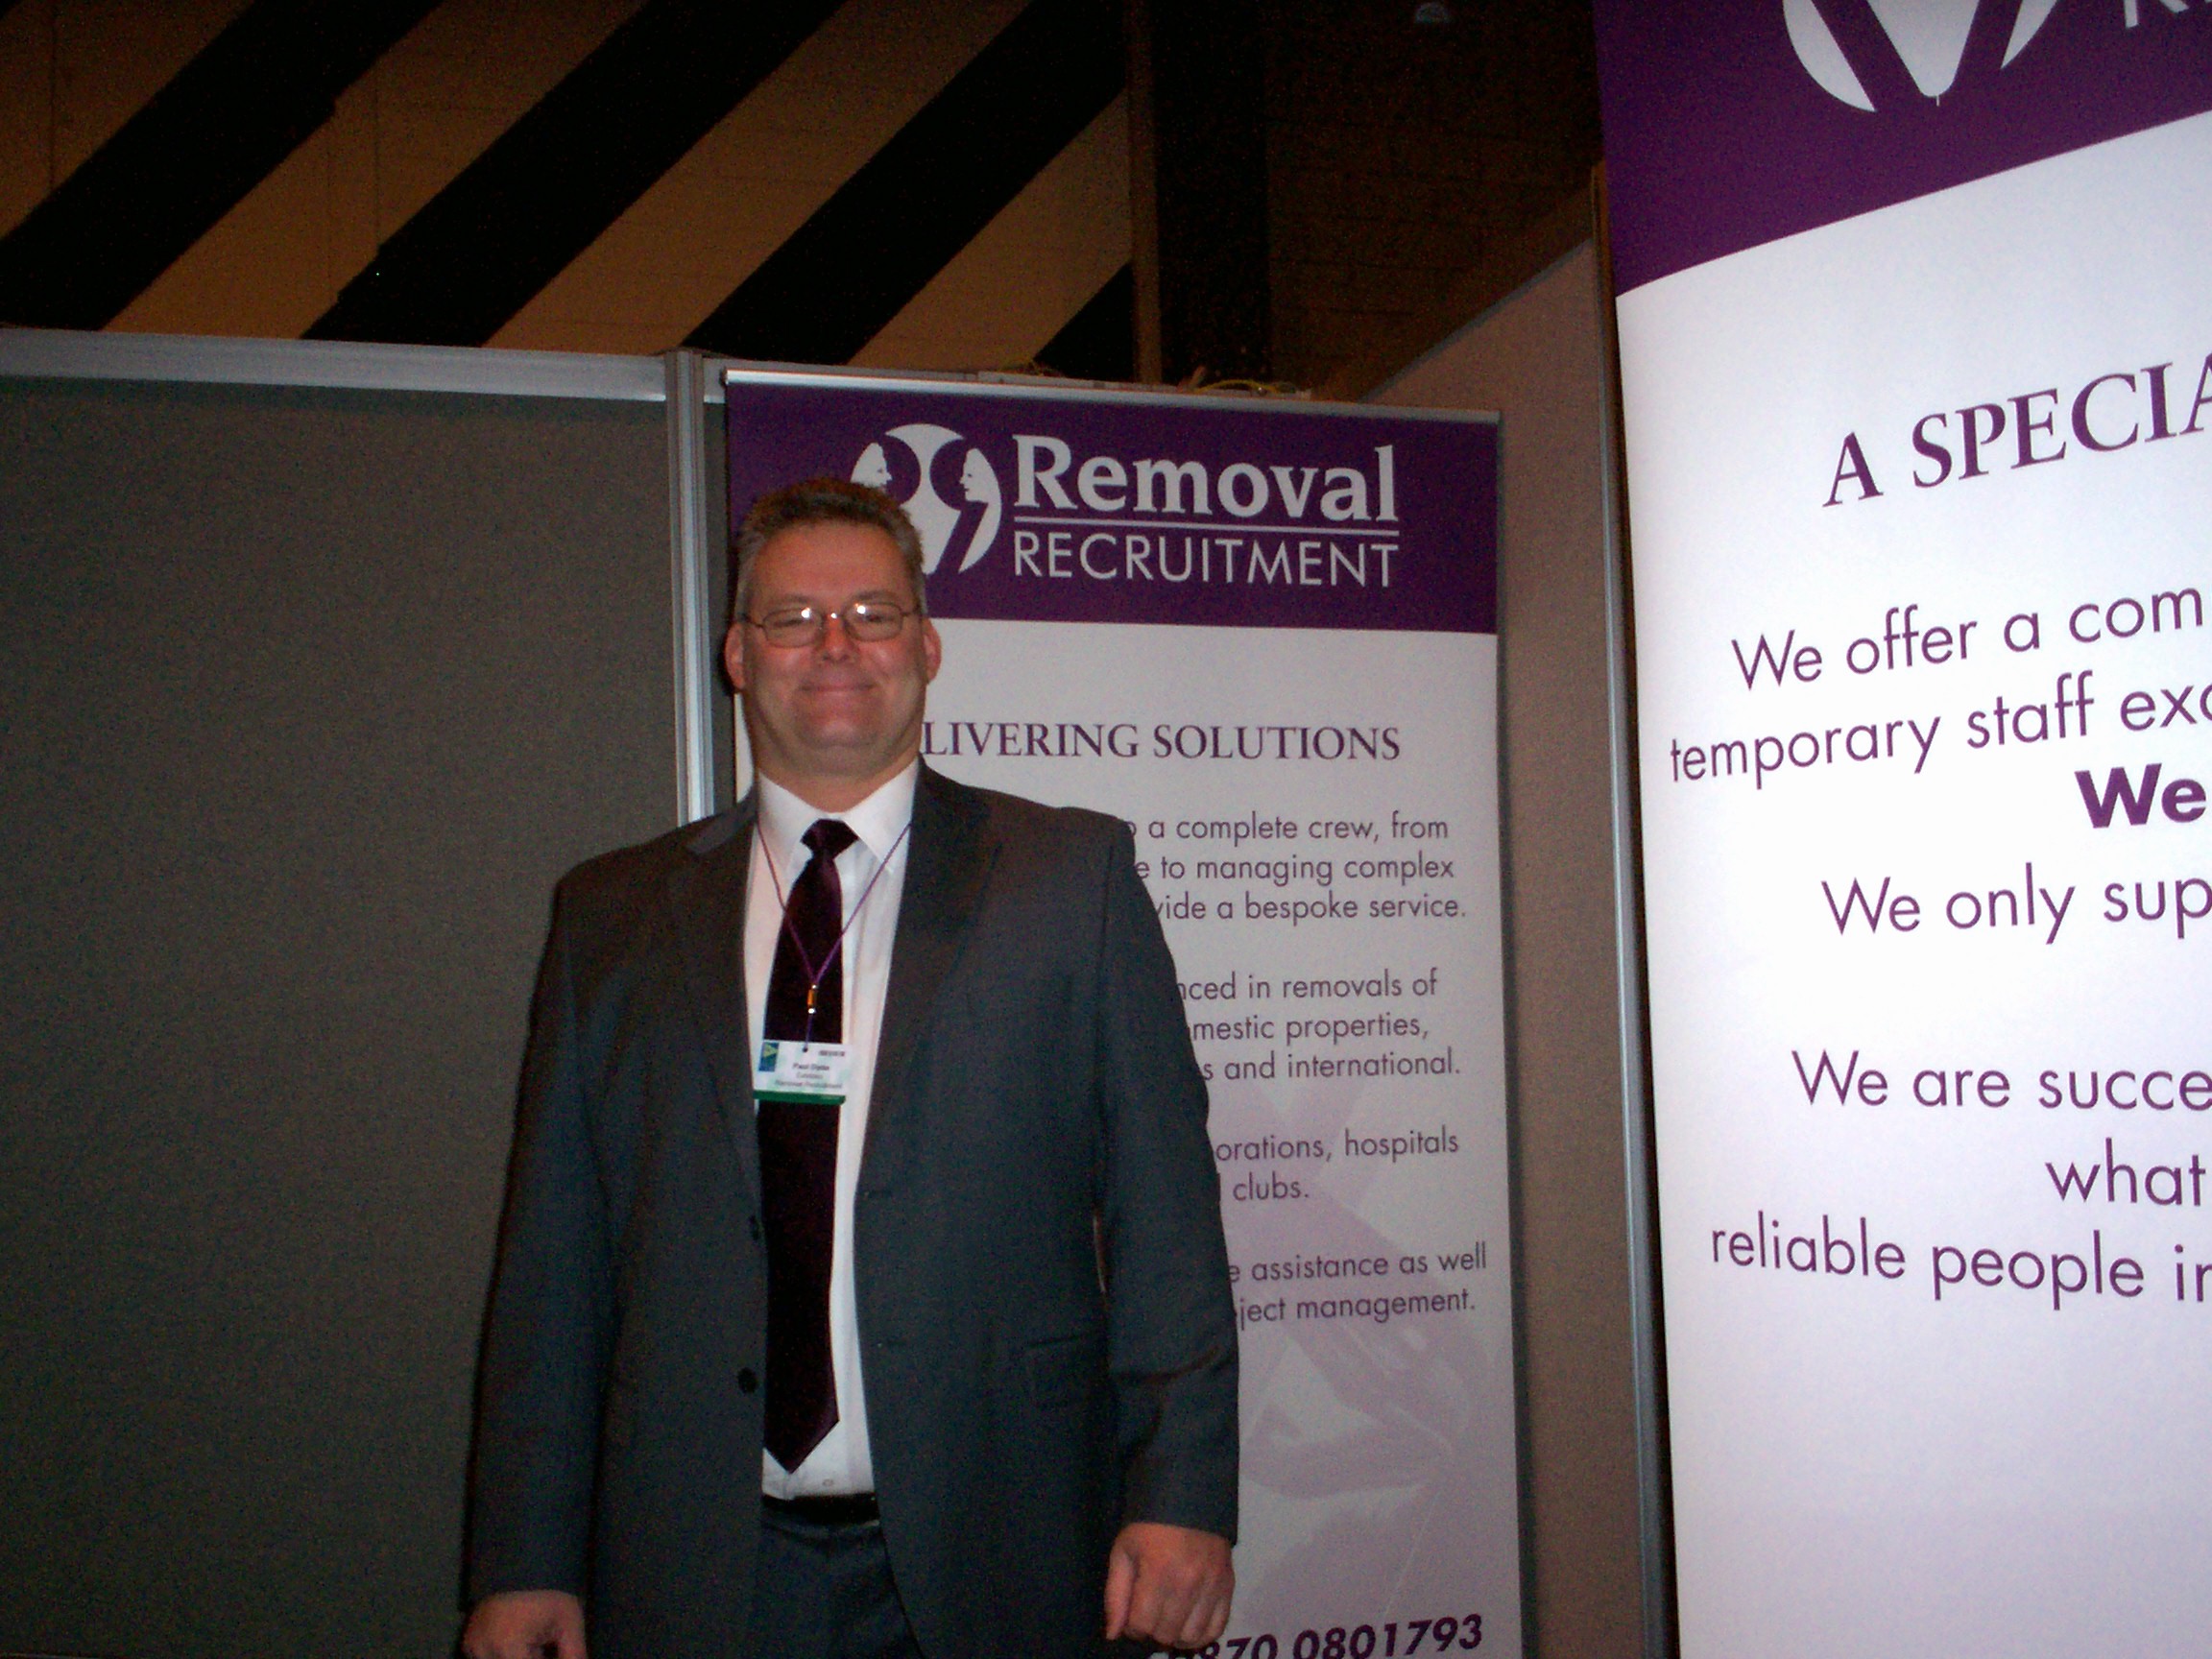 Removal Recruitment ltd at Movers and Storage show